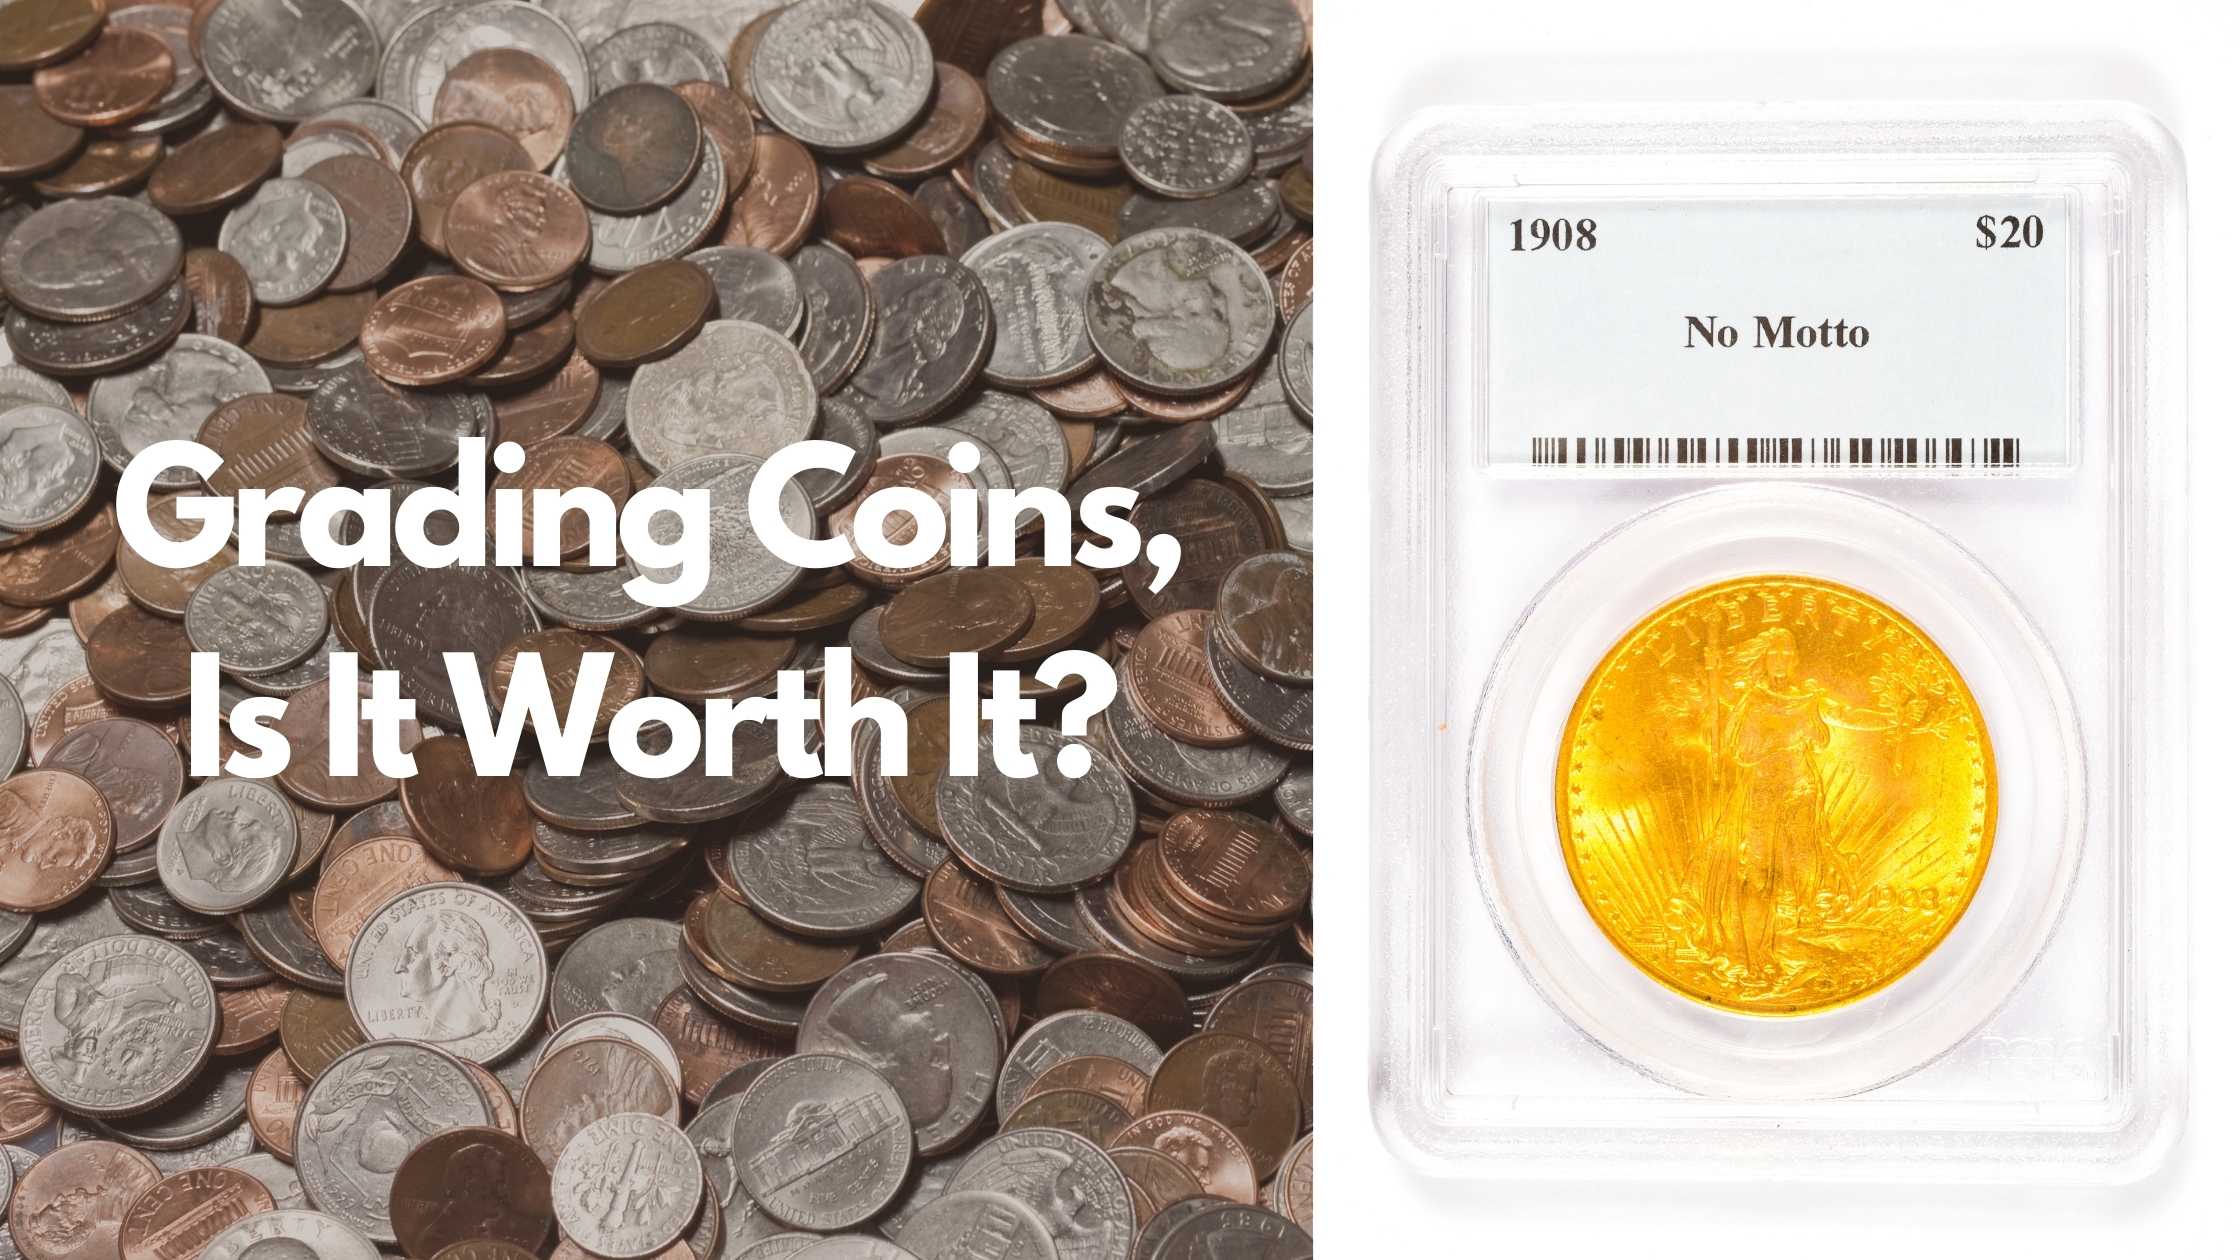 Have you thought about getting your coins graded by NGC or PCGS